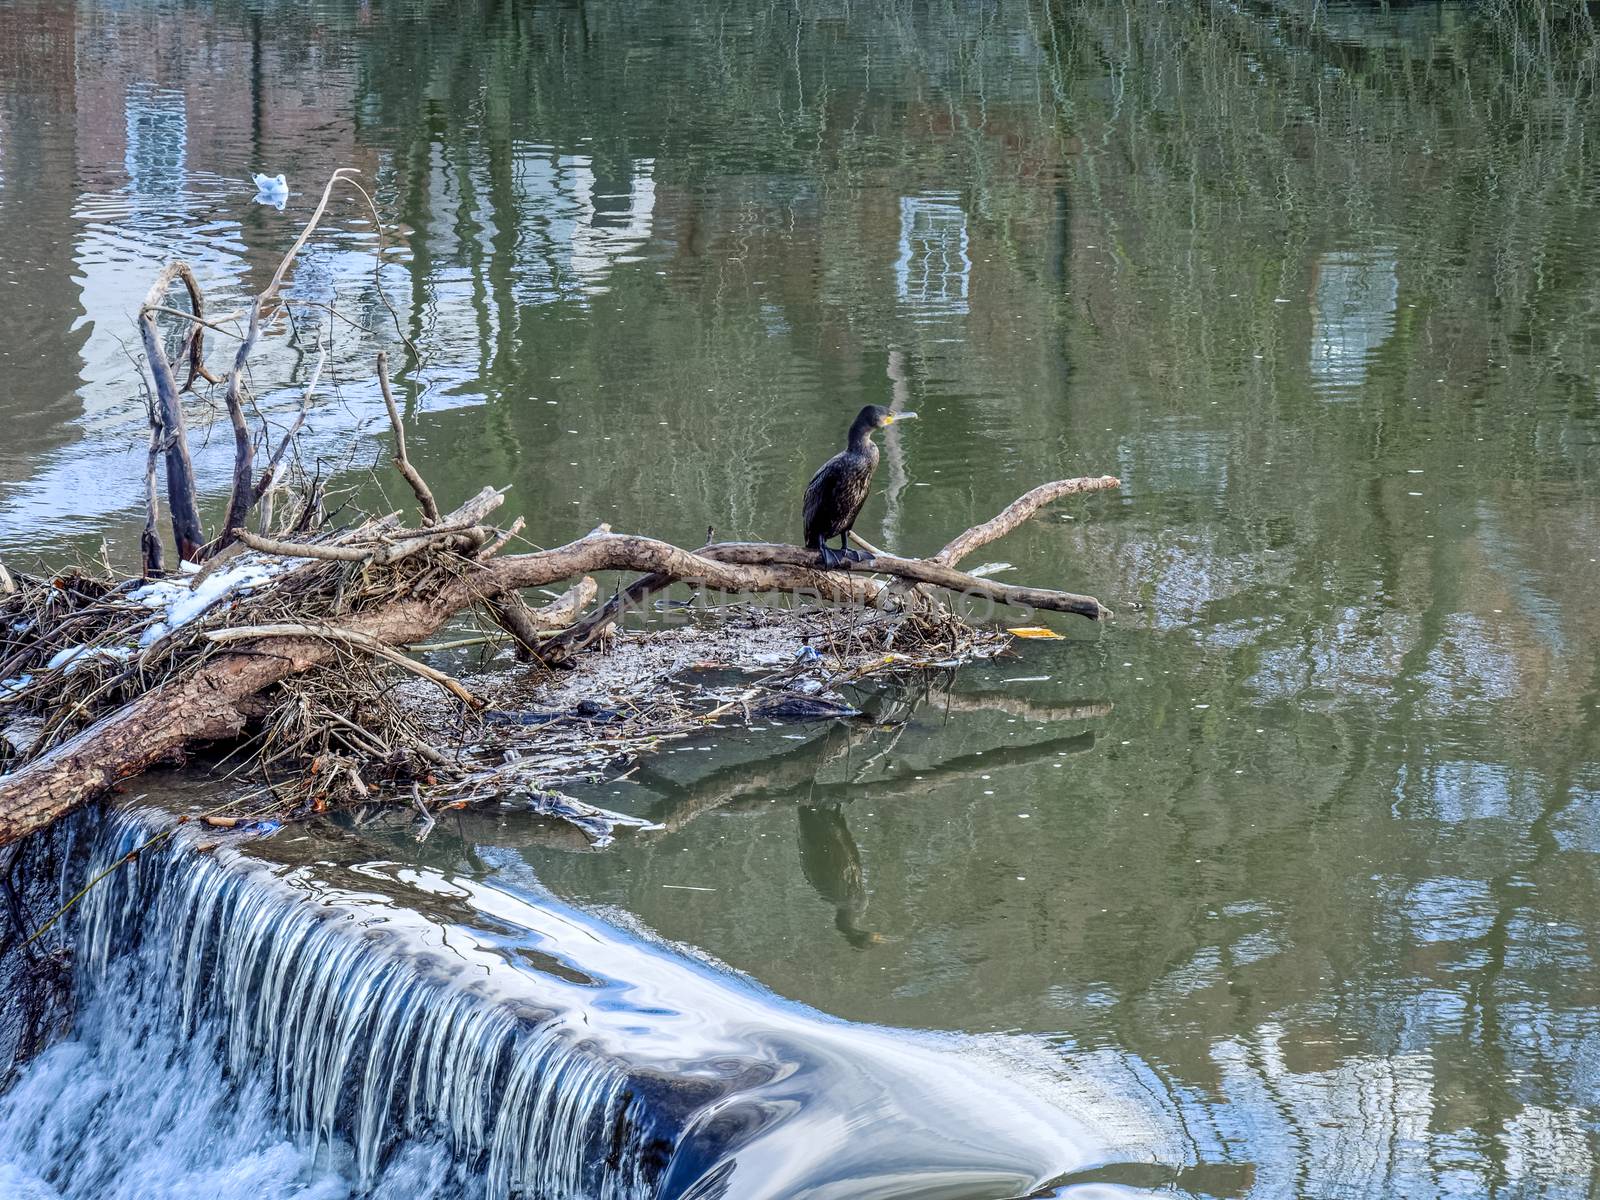 Cormorant standing on a fallen tree stuck in the weir on the River Wear in Durham